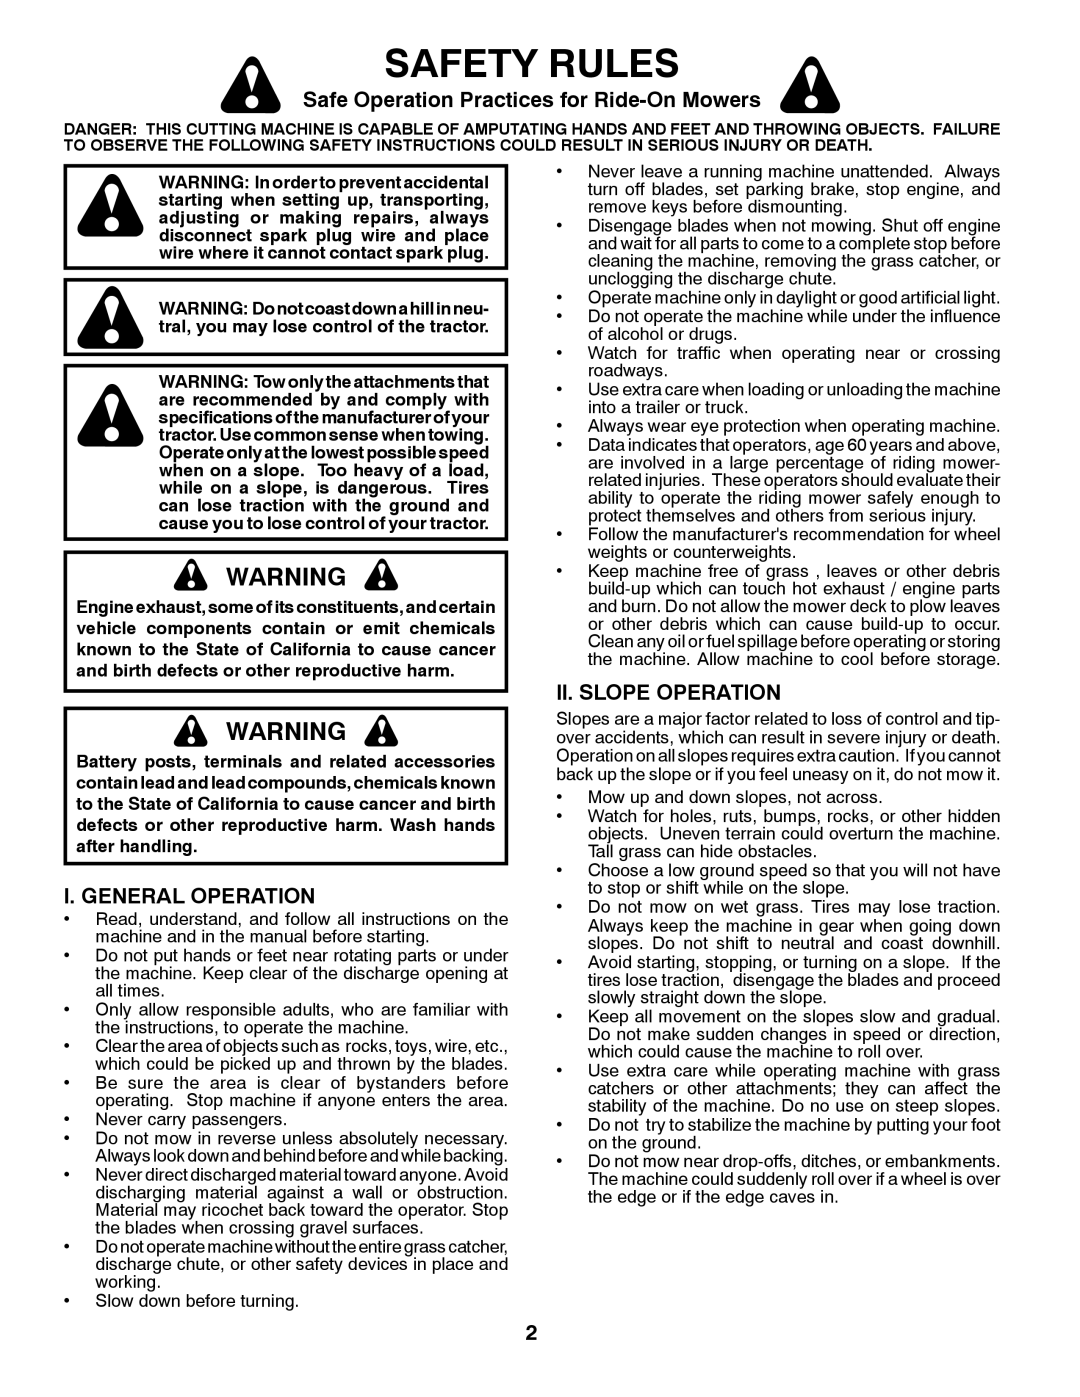 Husqvarna 96045002800 Safety Rules, Safe Operation Practices for Ride-OnMowers, I. General Operation, Ii. Slope Operation 